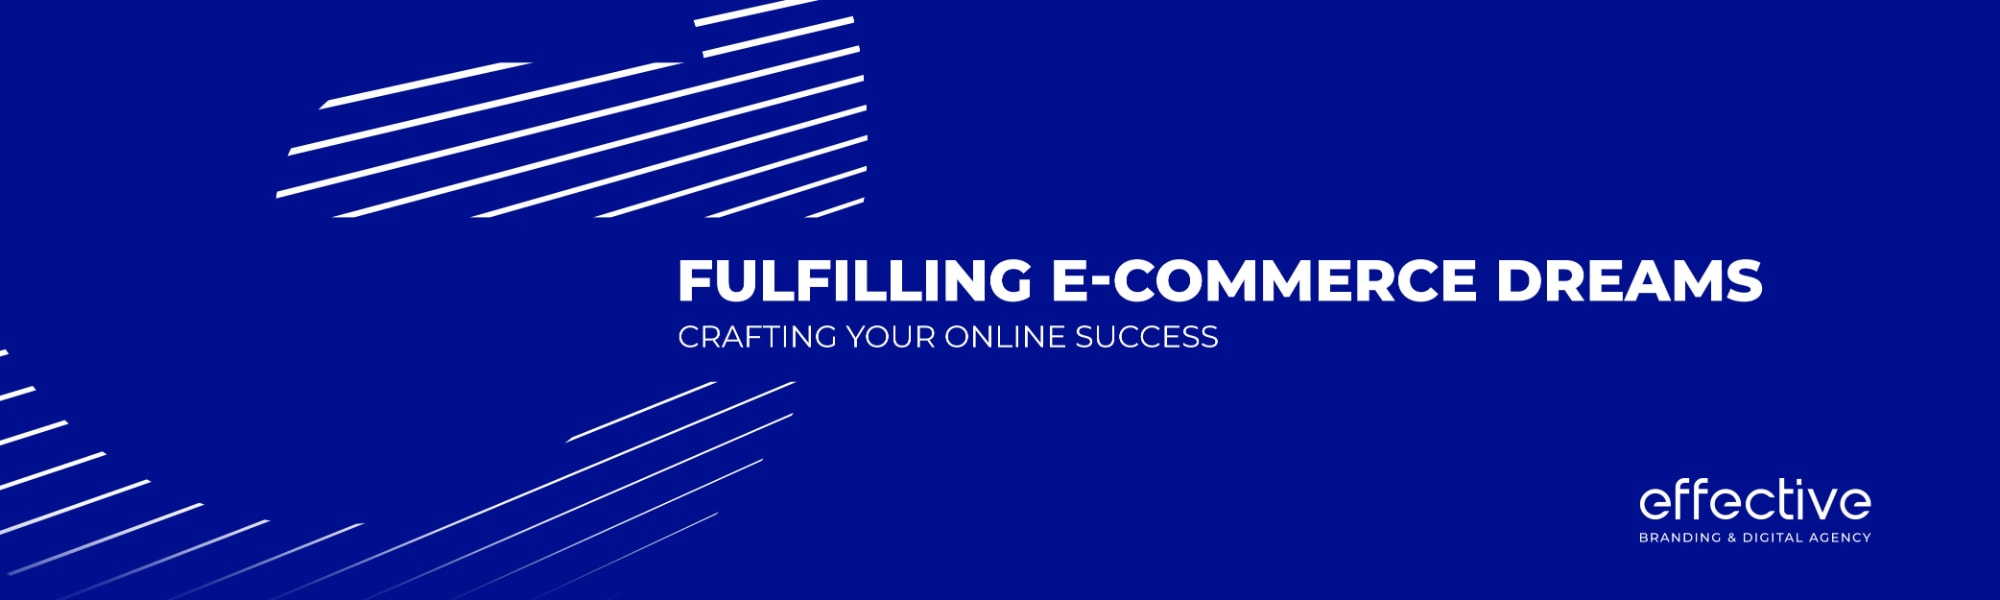 Fulfilling E-Commerce Dreams Crafting Your Online Success